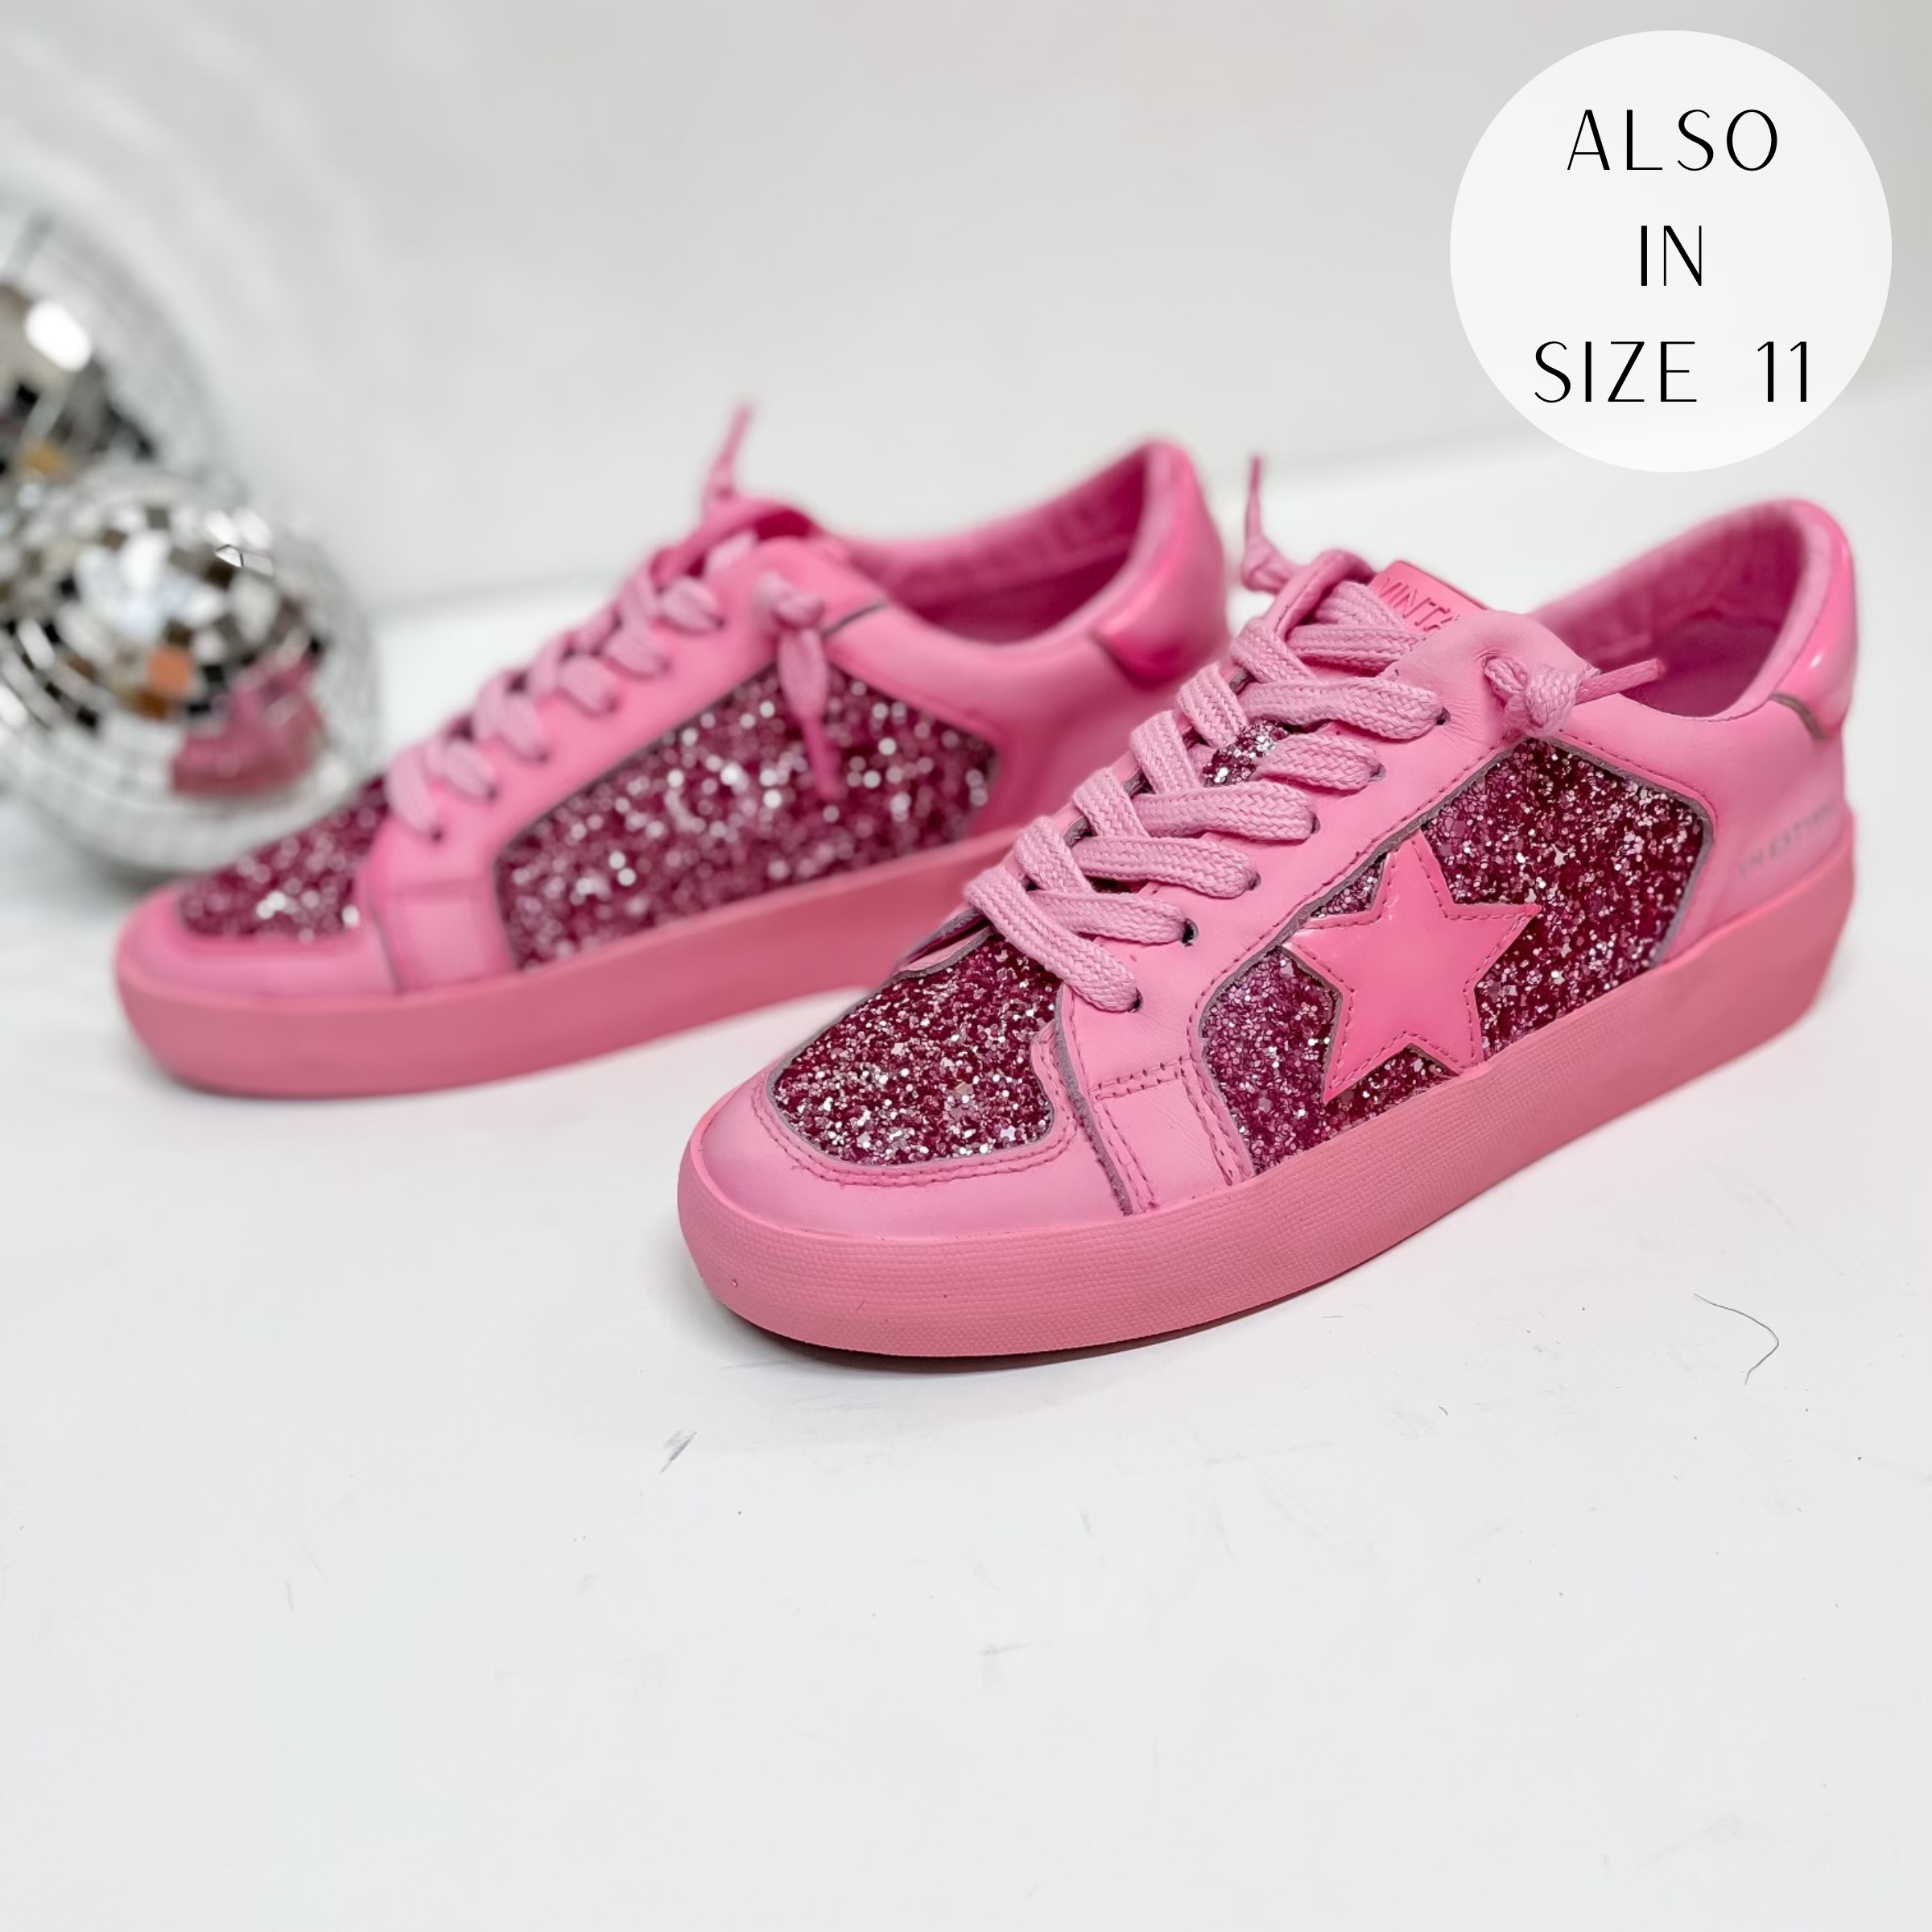 Vintage Havana | Alexis Dip Dye Glitter Sneakers in Hot Pink - Giddy Up Glamour Boutique